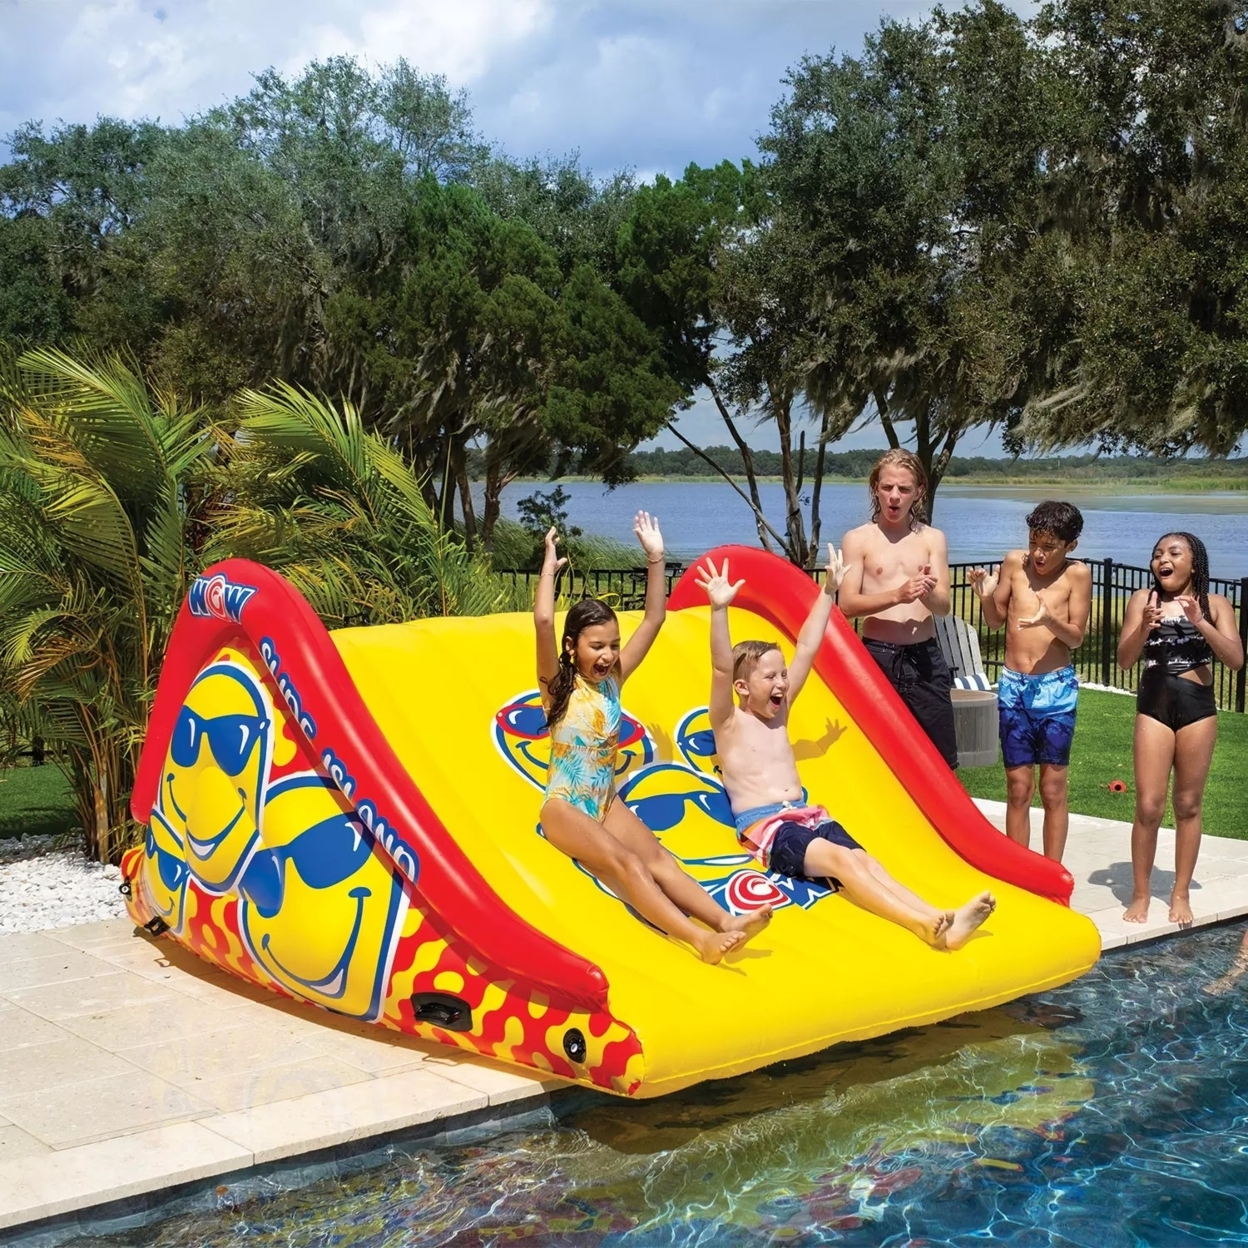 WOW Sports Floating Island Slide and Water Walkway Combo, Red - image 2 of 5